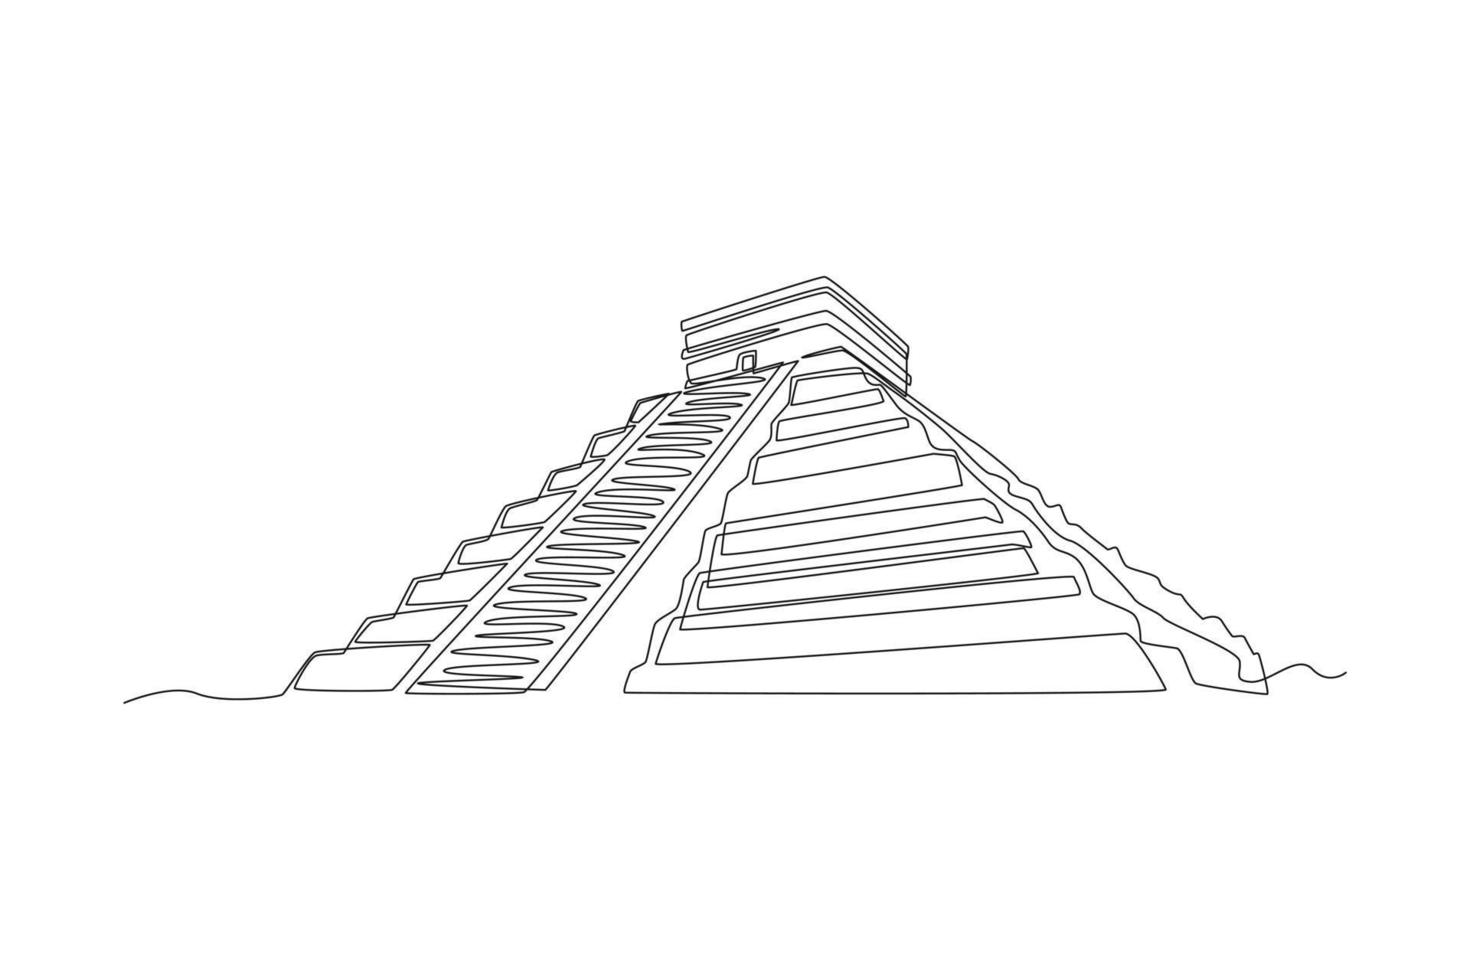 Continuous one line drawing Mayan pyramid in Mexico. Landmark concept.  Single line draw design vector graphic illustration.